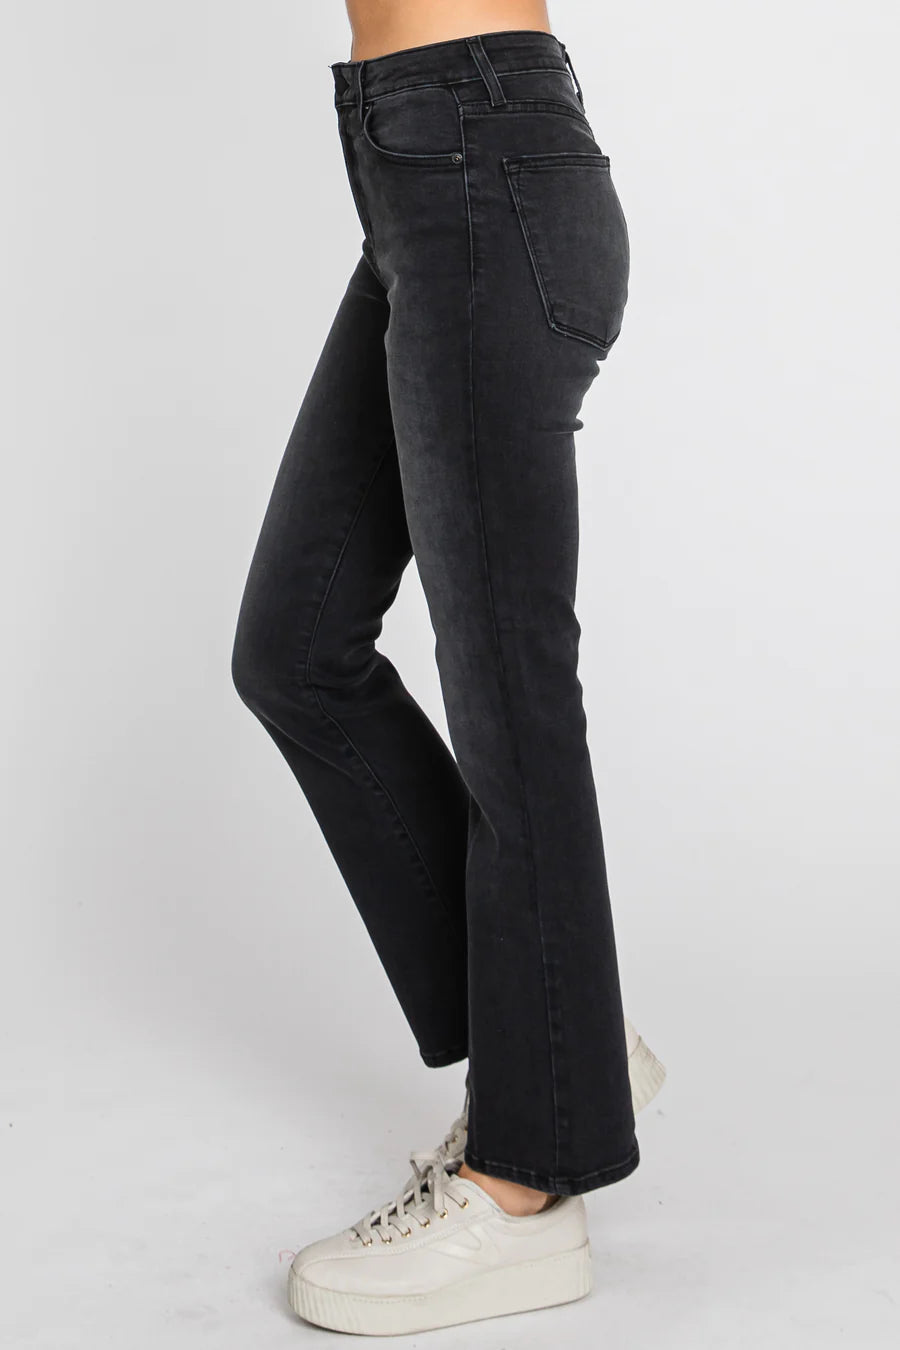 Baby Flare Jeans in Black